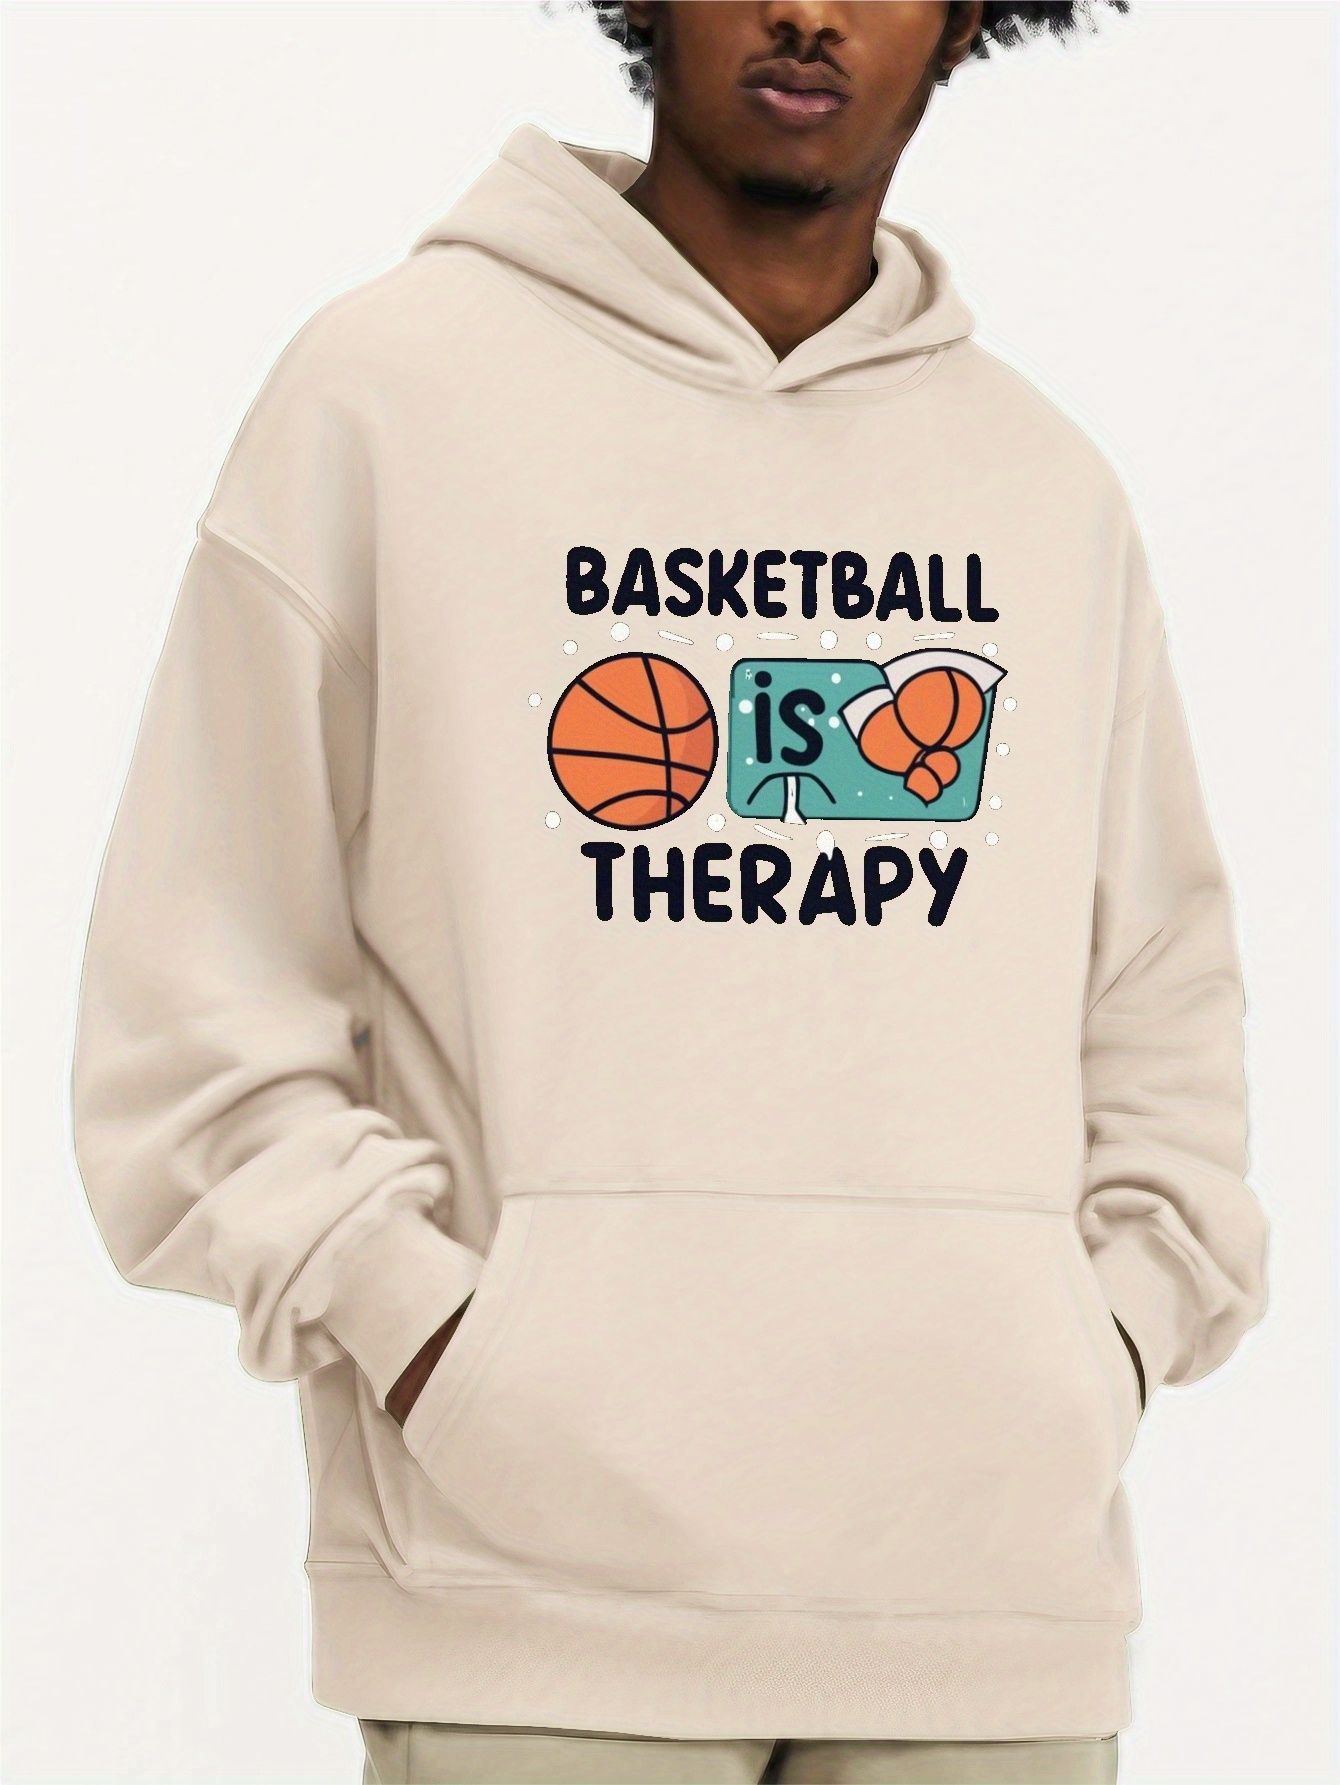 Therapy Sweatsuit (Hoodie)